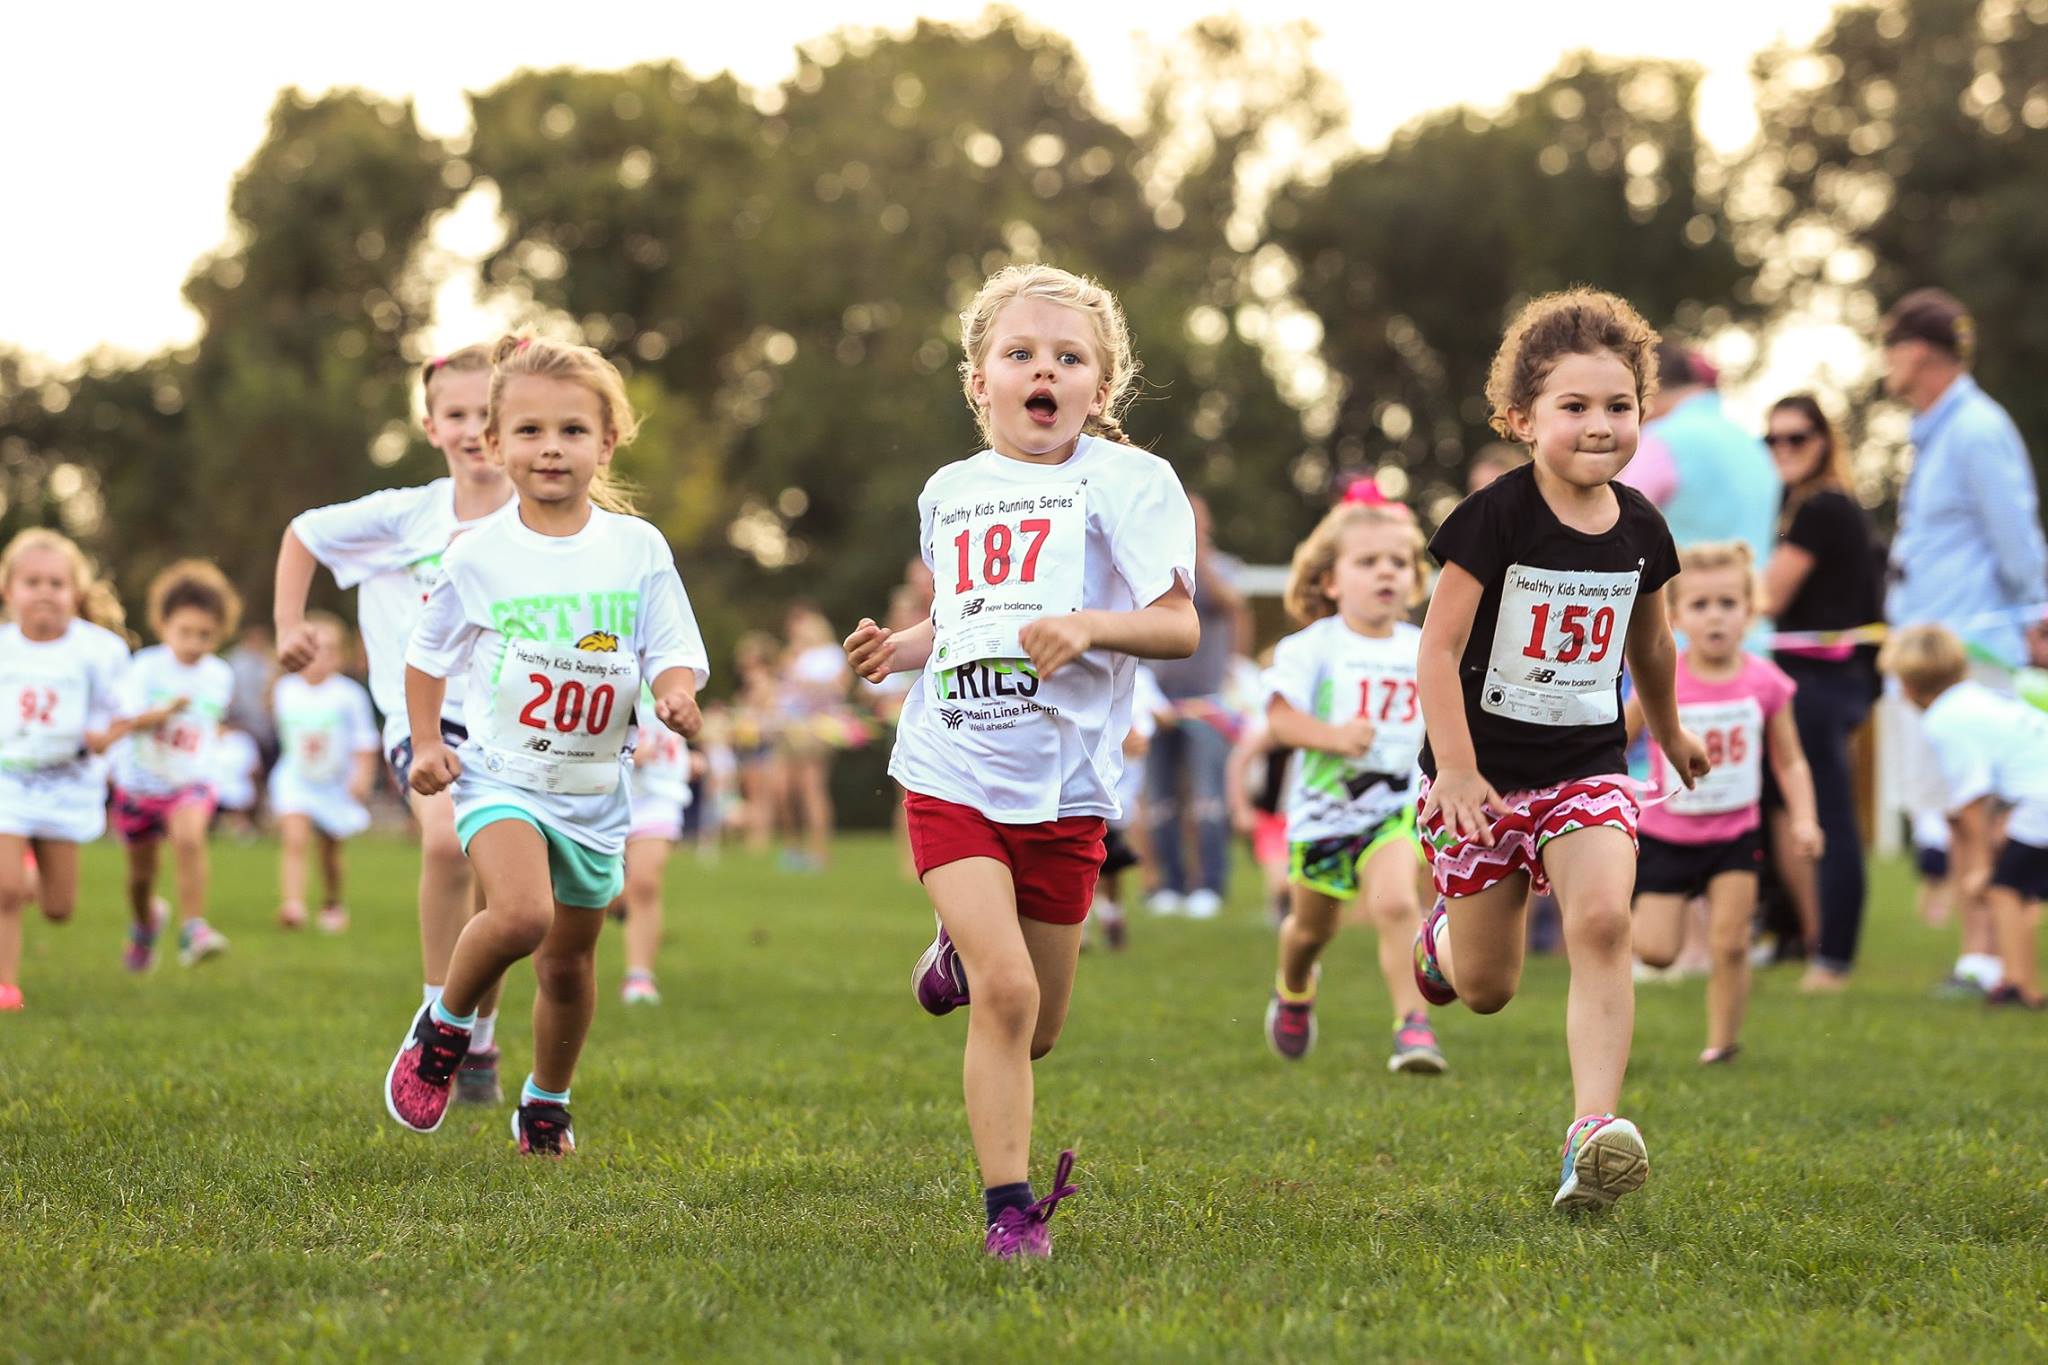 Healthy Kids Running Series Inspires Kids to be More Active